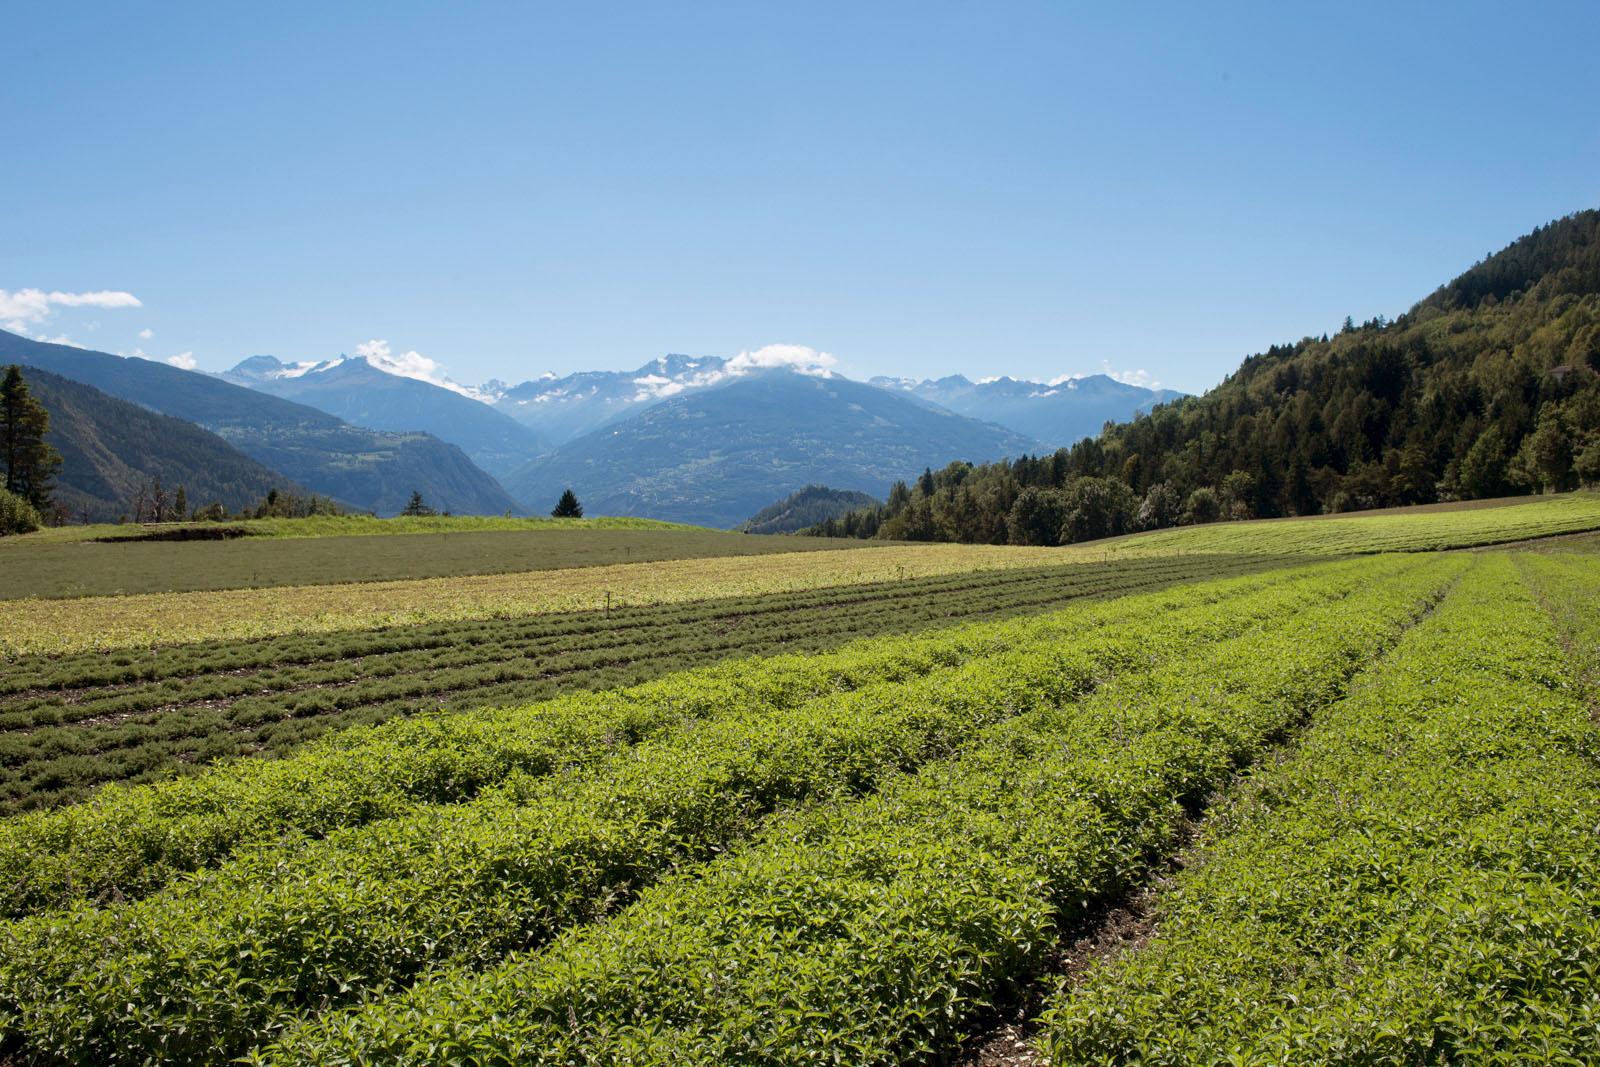 In Switzerland, since about 30 years, peppermint (Mentha × piperita L.) growers have been using the ‘541’ clone, originally from Crimea, chosen for its productivity, its high essential oil content and its tolerance to rust (Puccinia